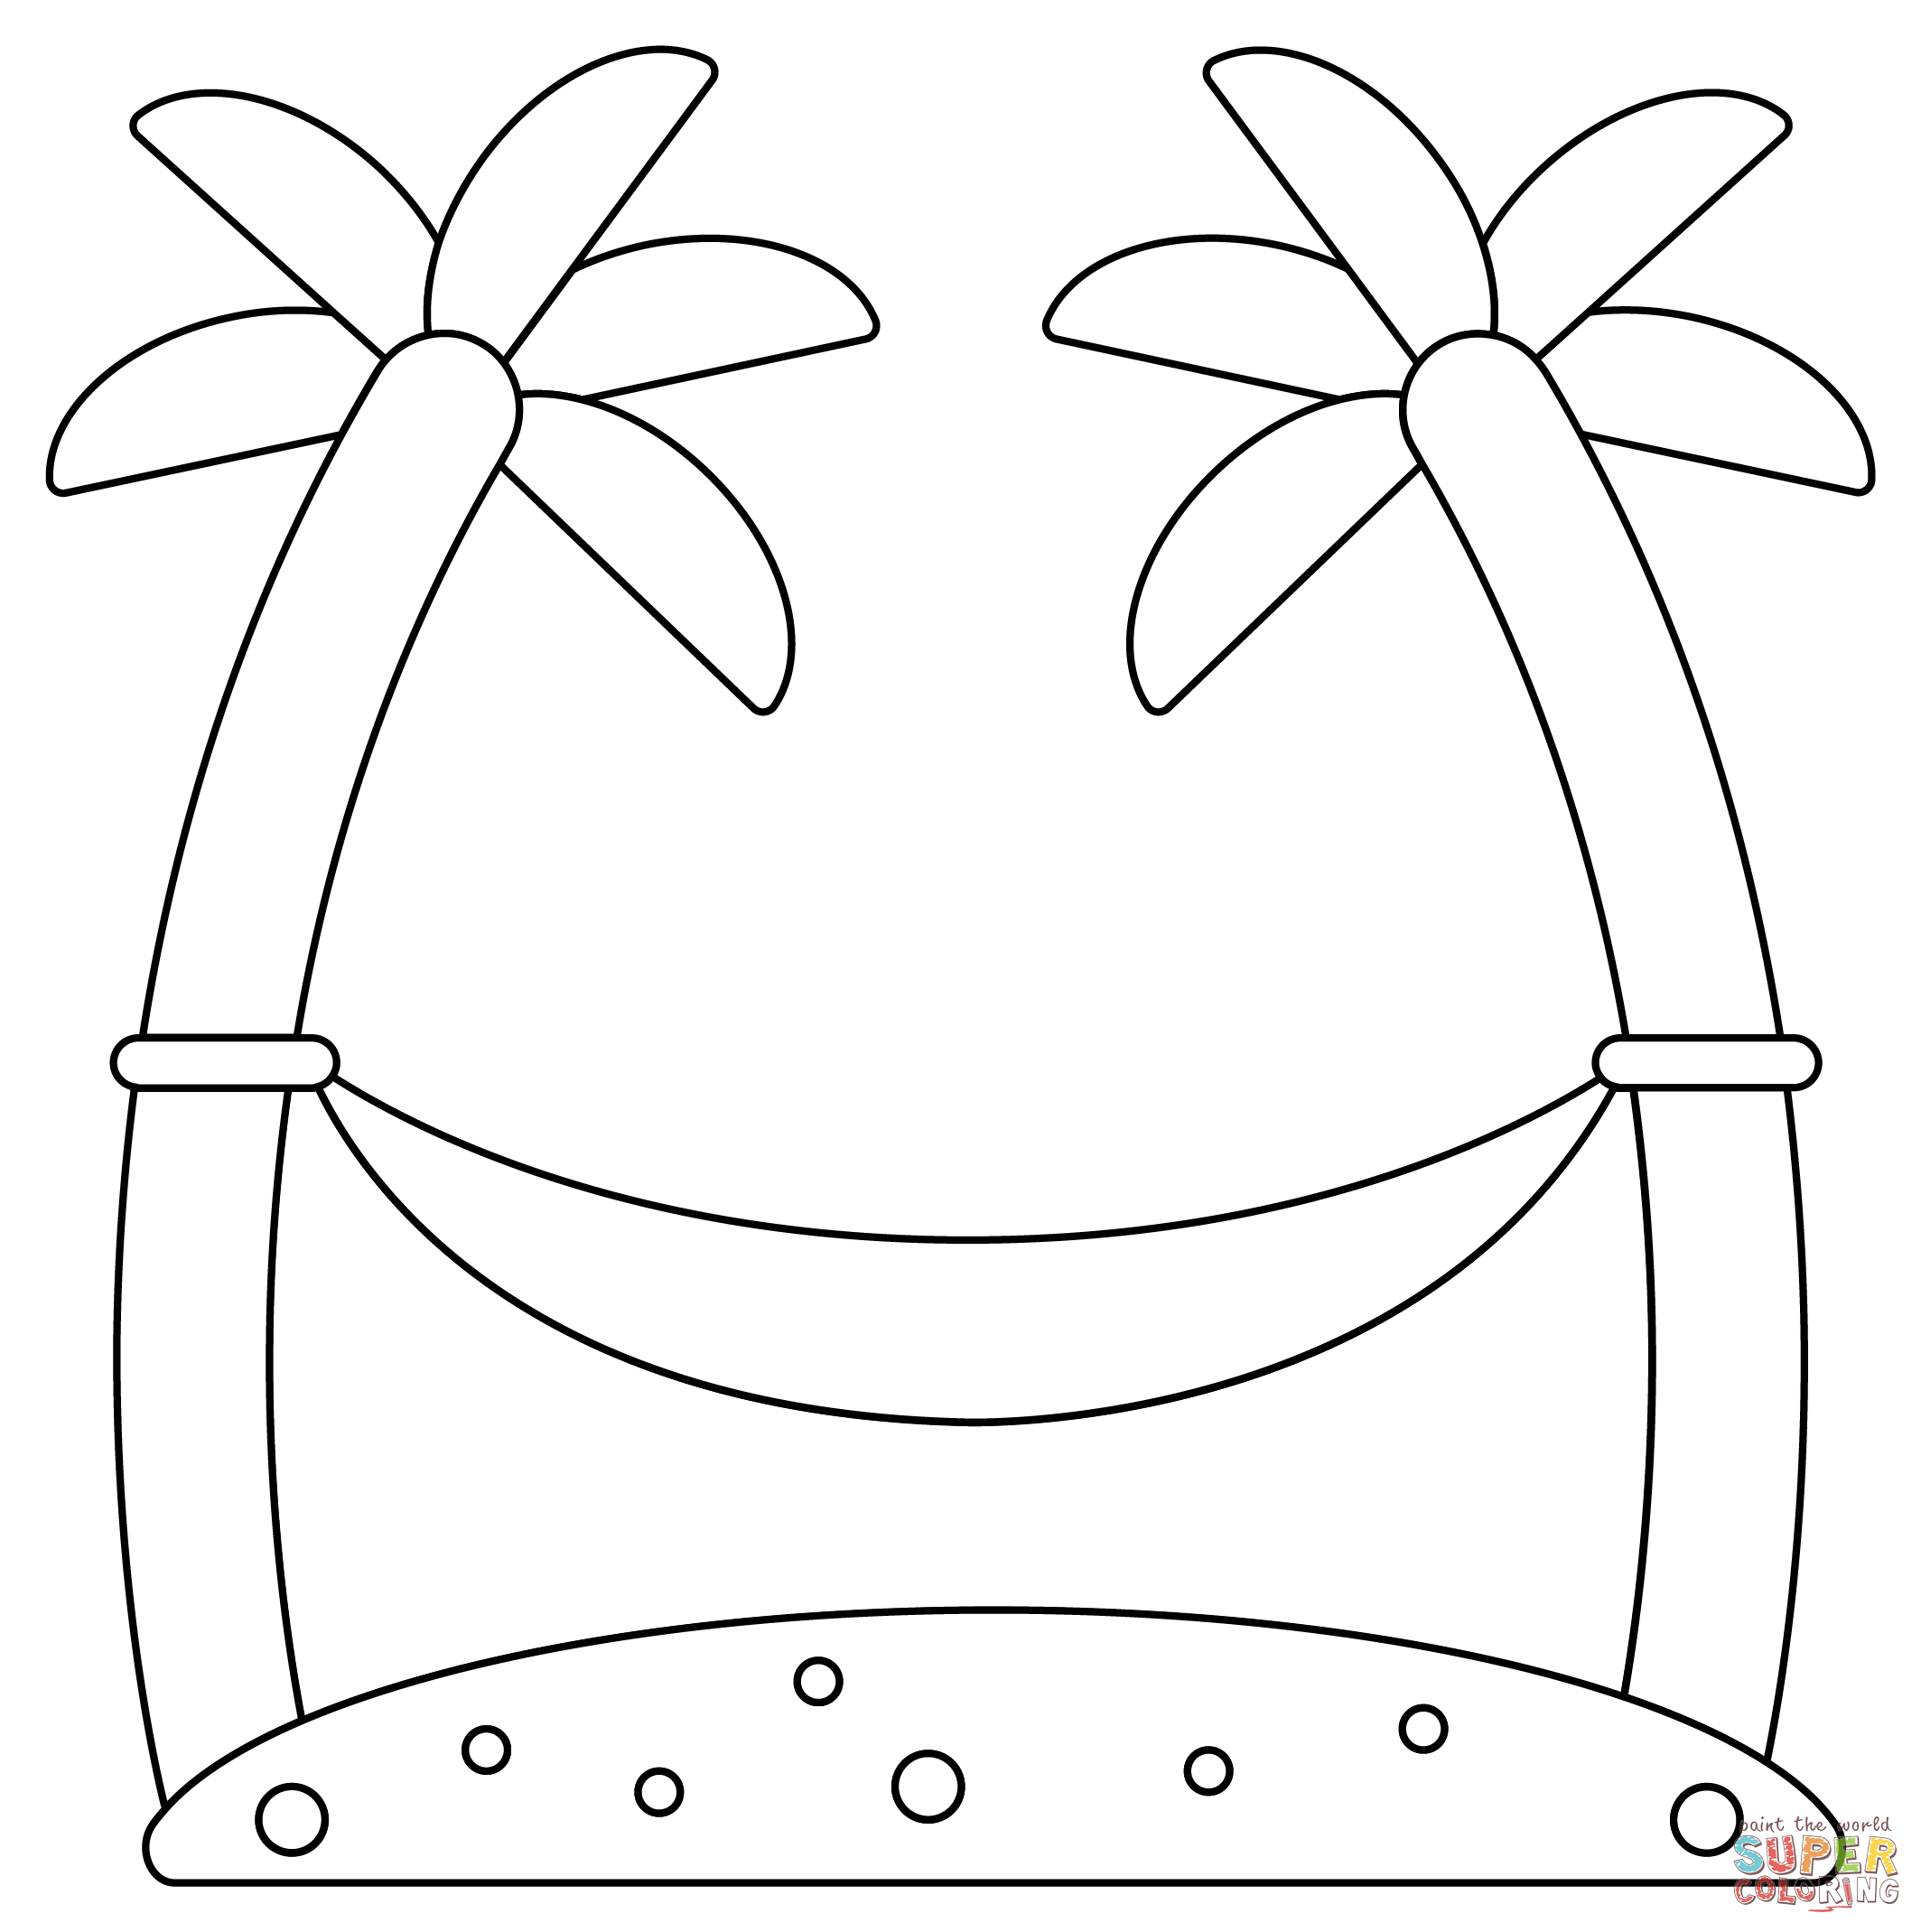 Tree hammock coloring page free printable coloring pages